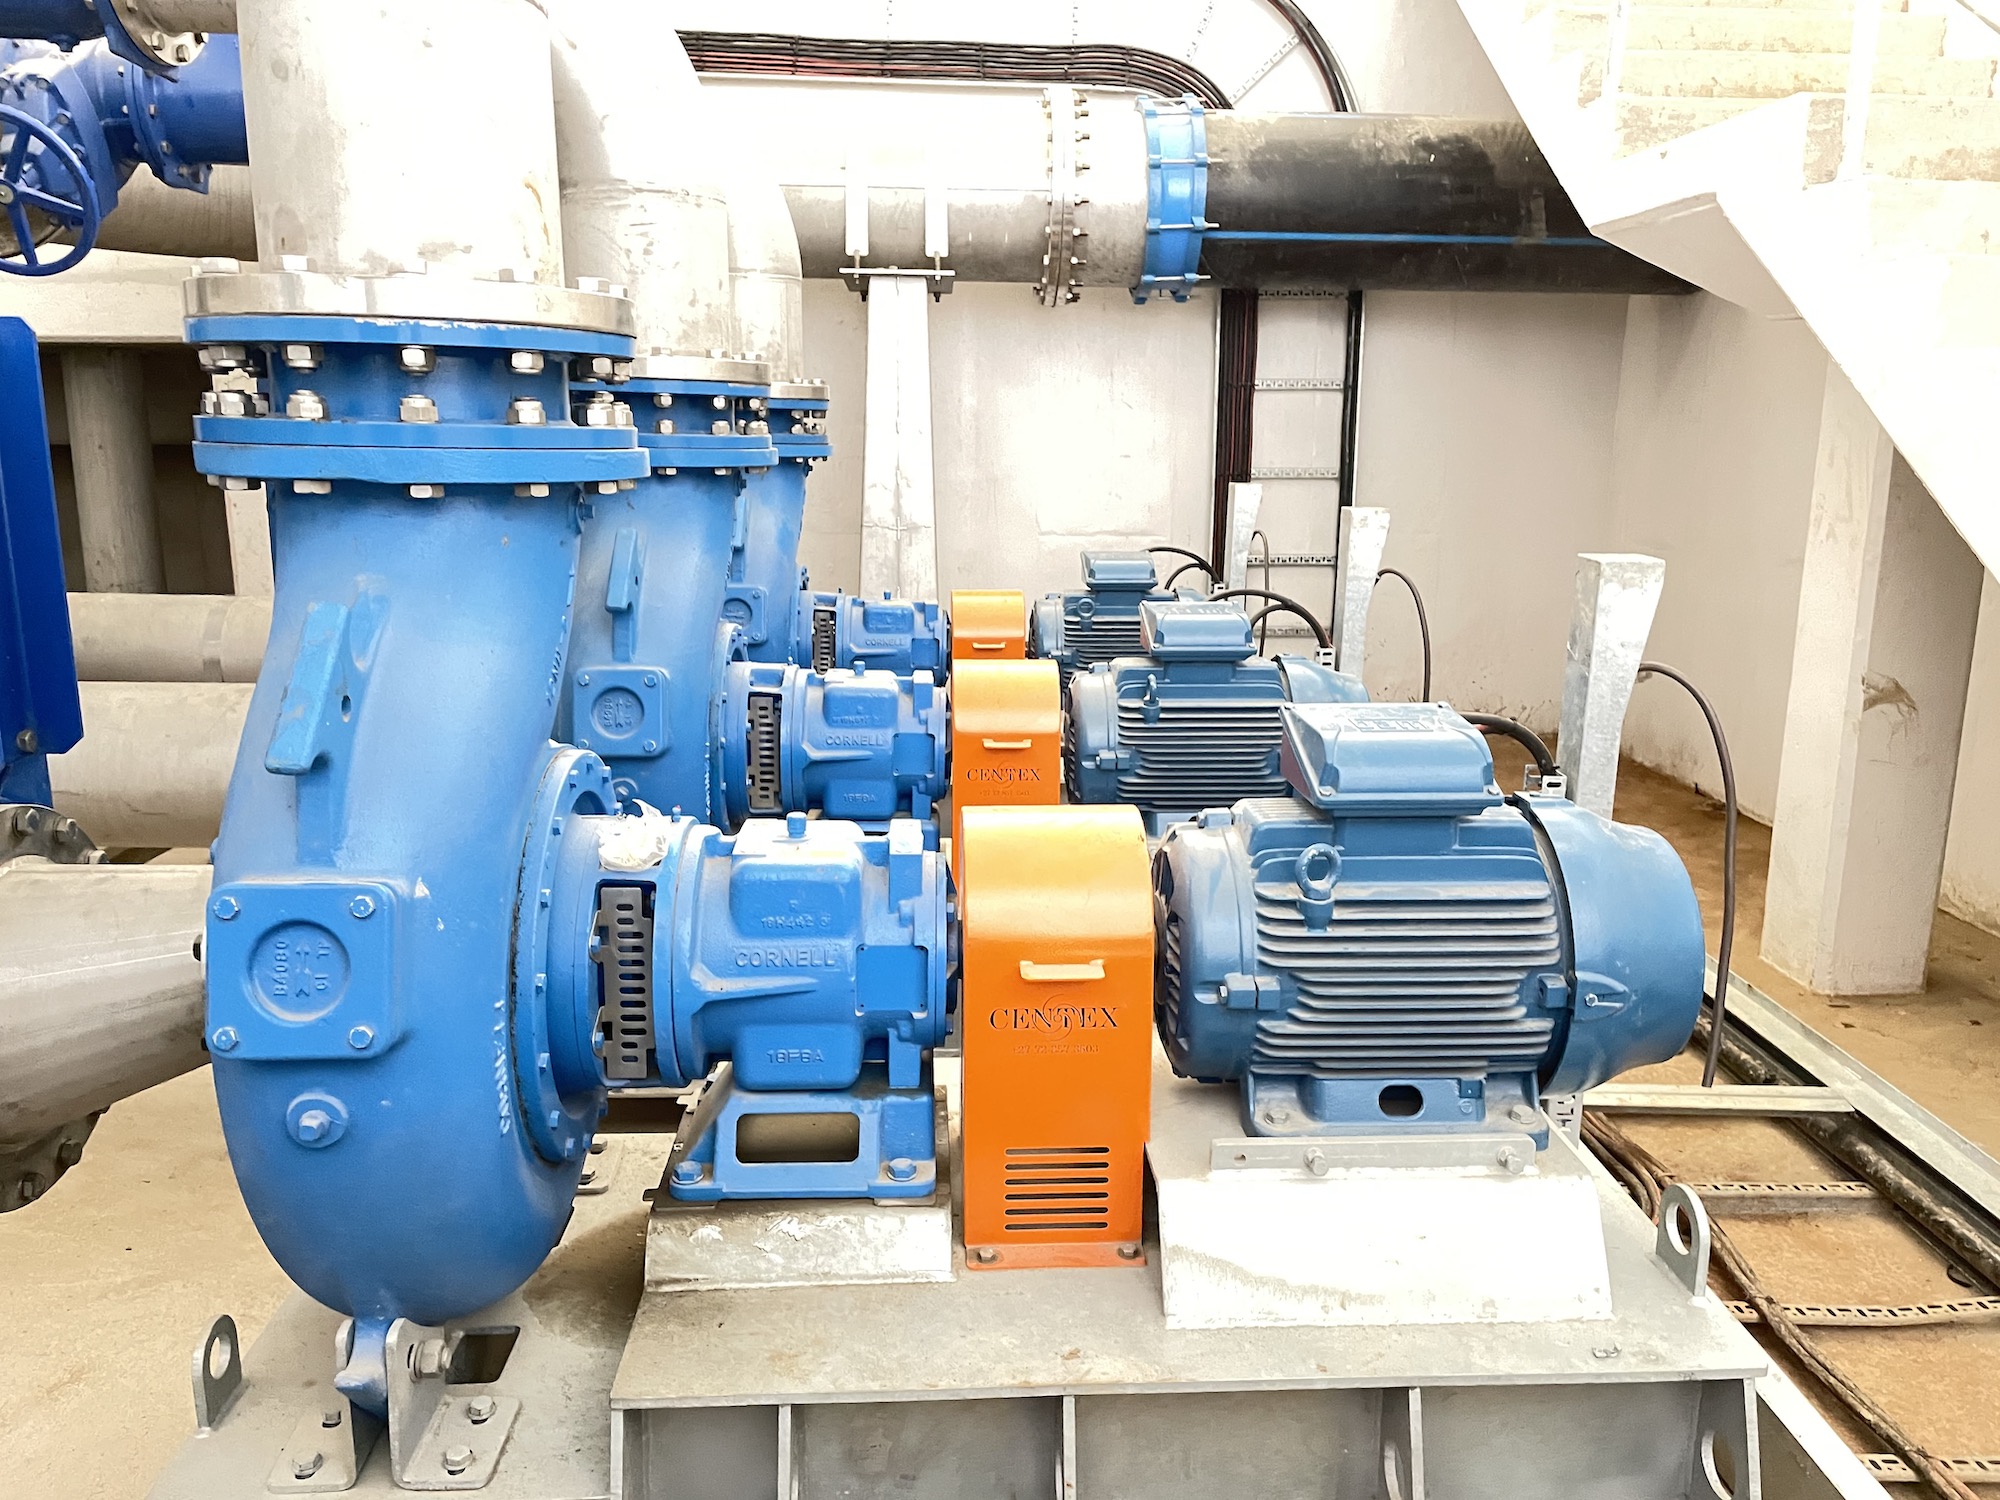 Cornell solids handling electric driven end suction centrifugal pump.